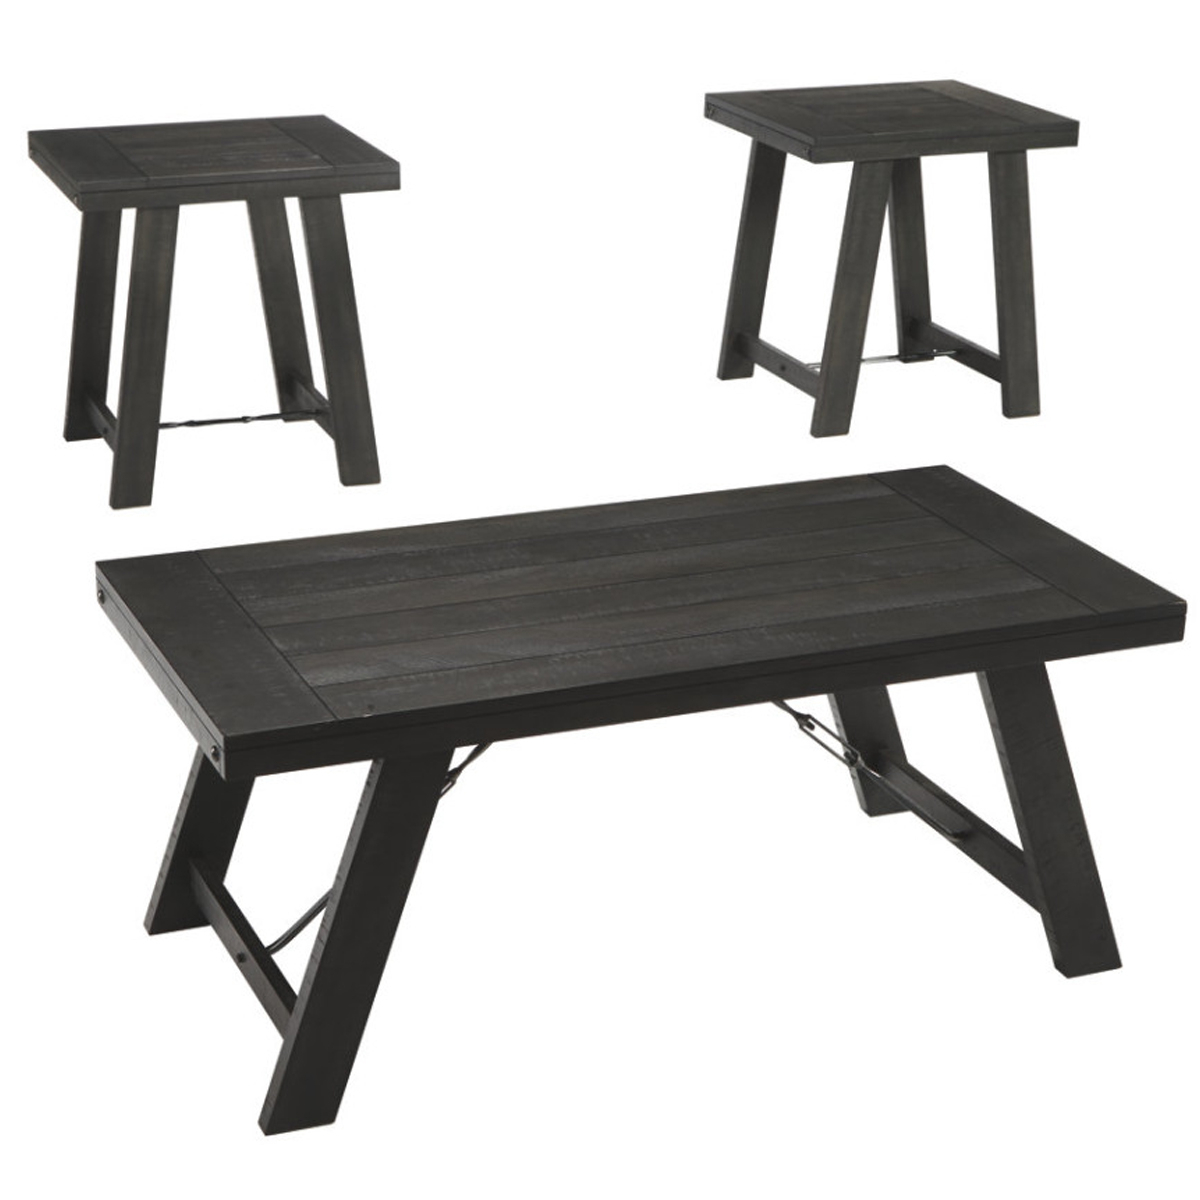 Plank Style Acacia Wood Table Set With Canted Legs, Set Of Three, Black- Saltoro Sherpi